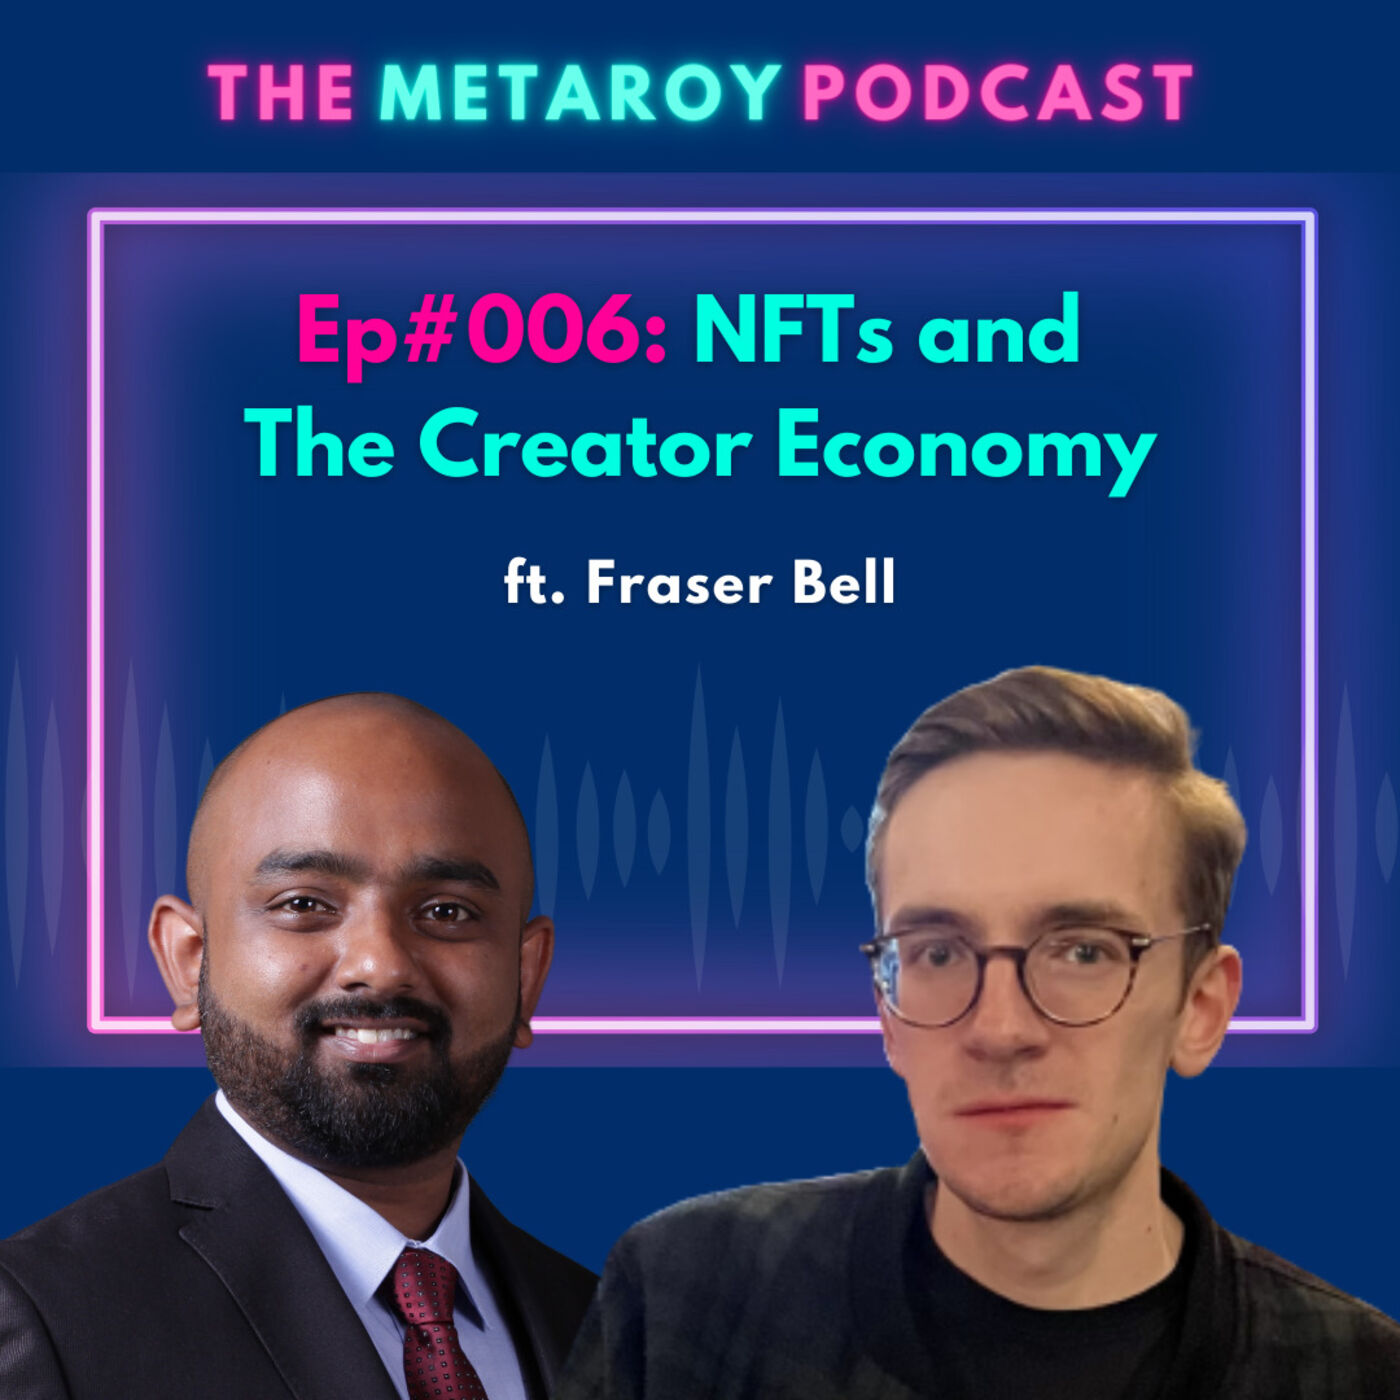 Fraser Bell: NFTs and The Creator Economy | Ep #006